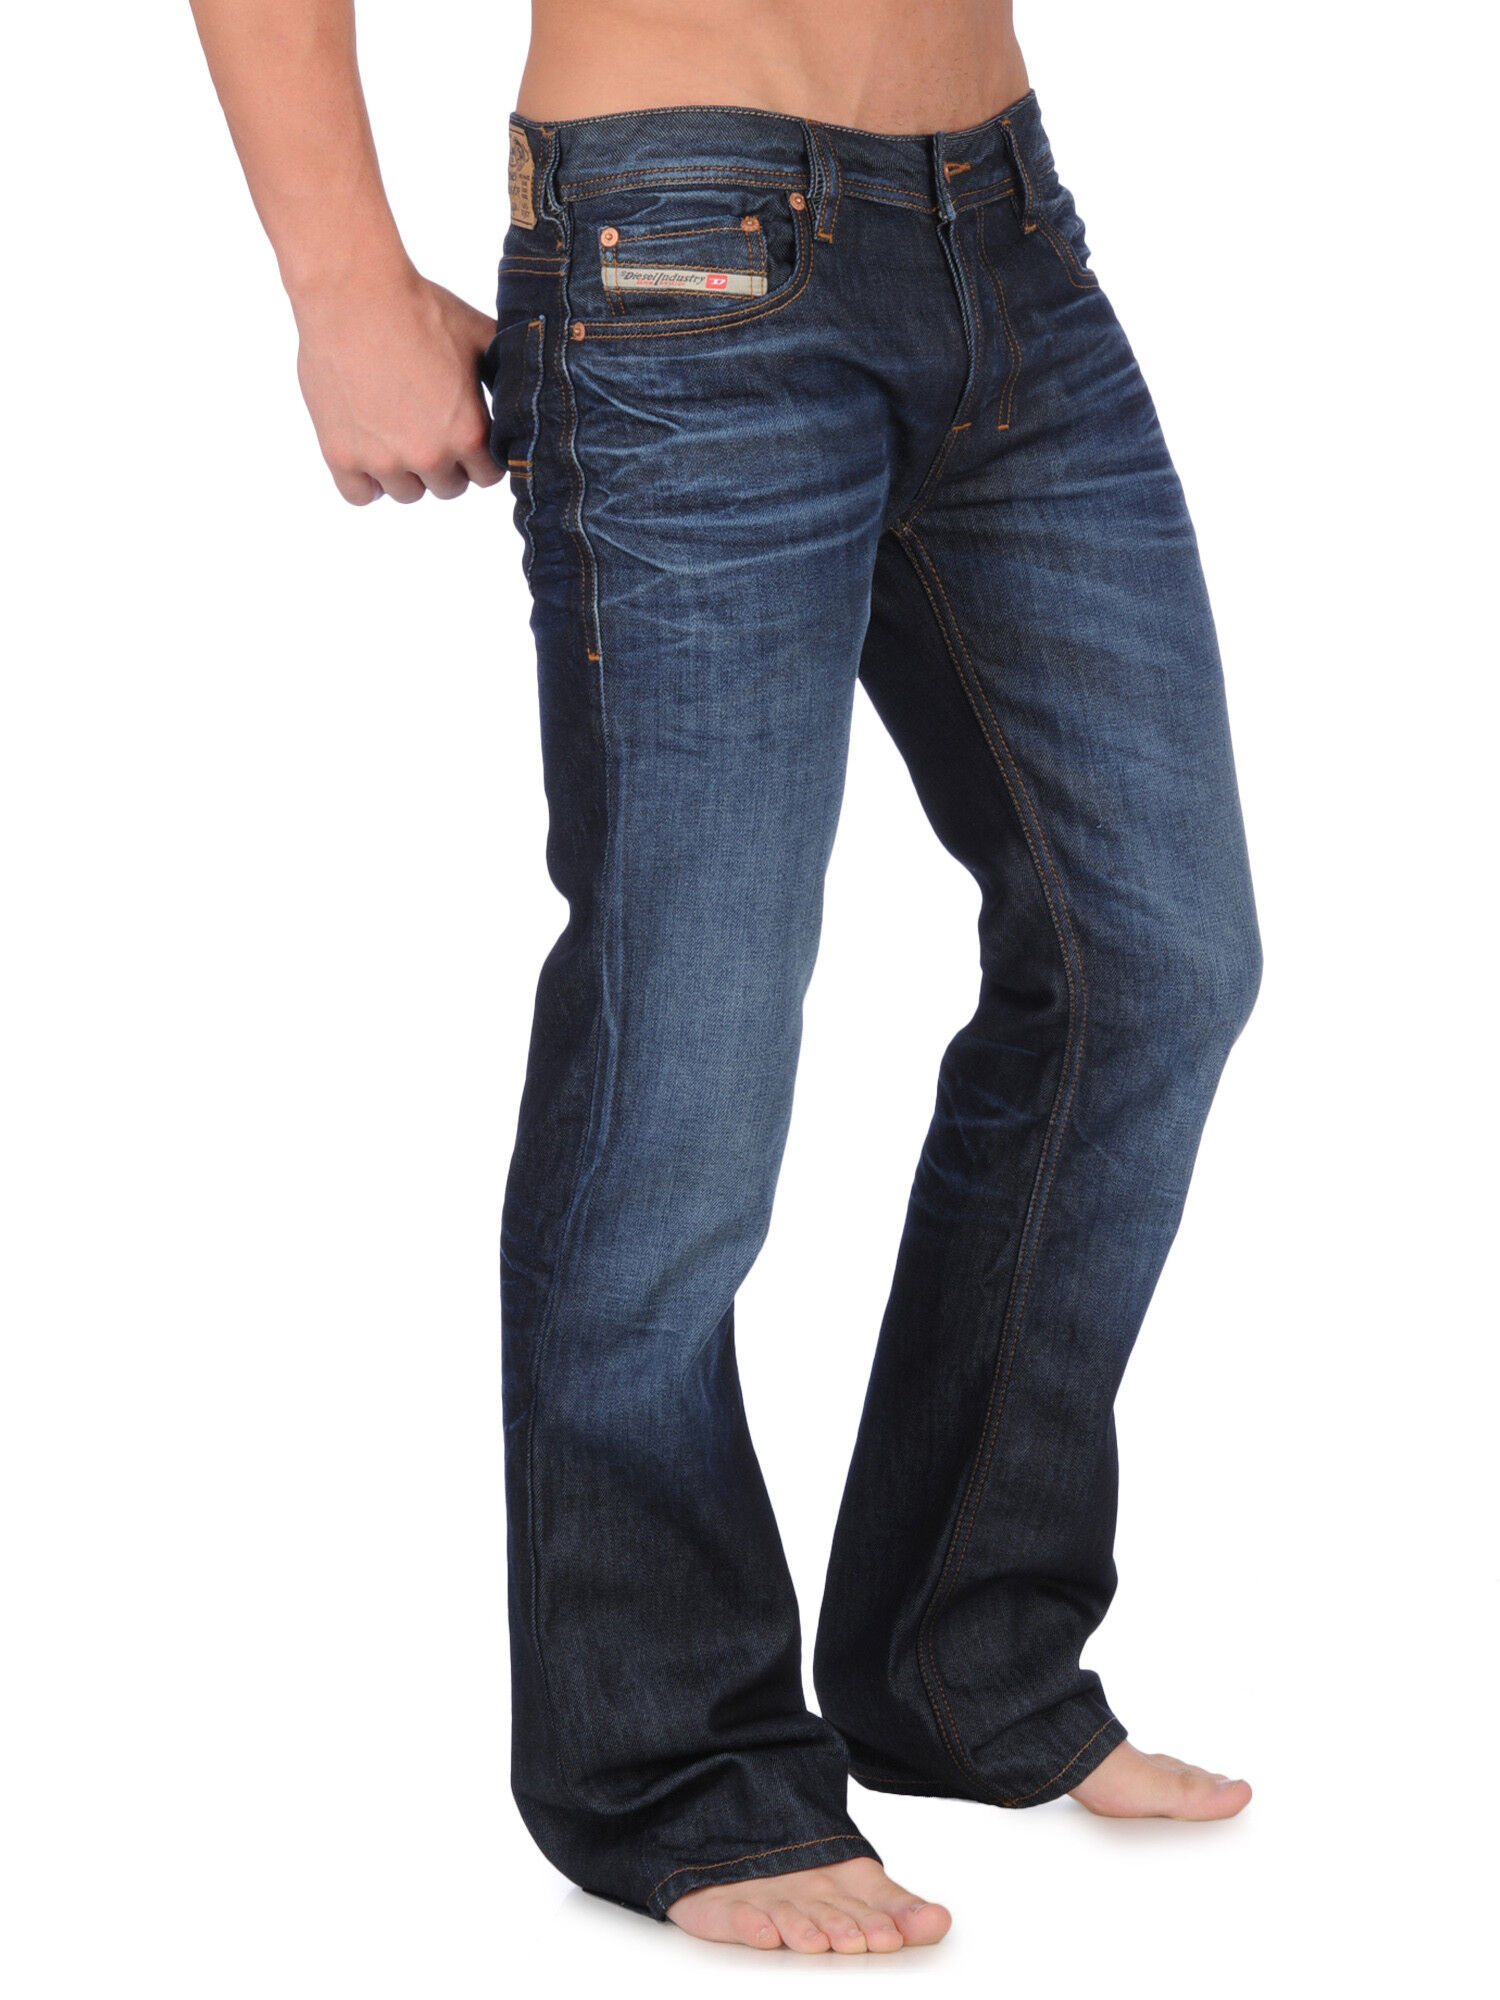 distressed thigh jeans